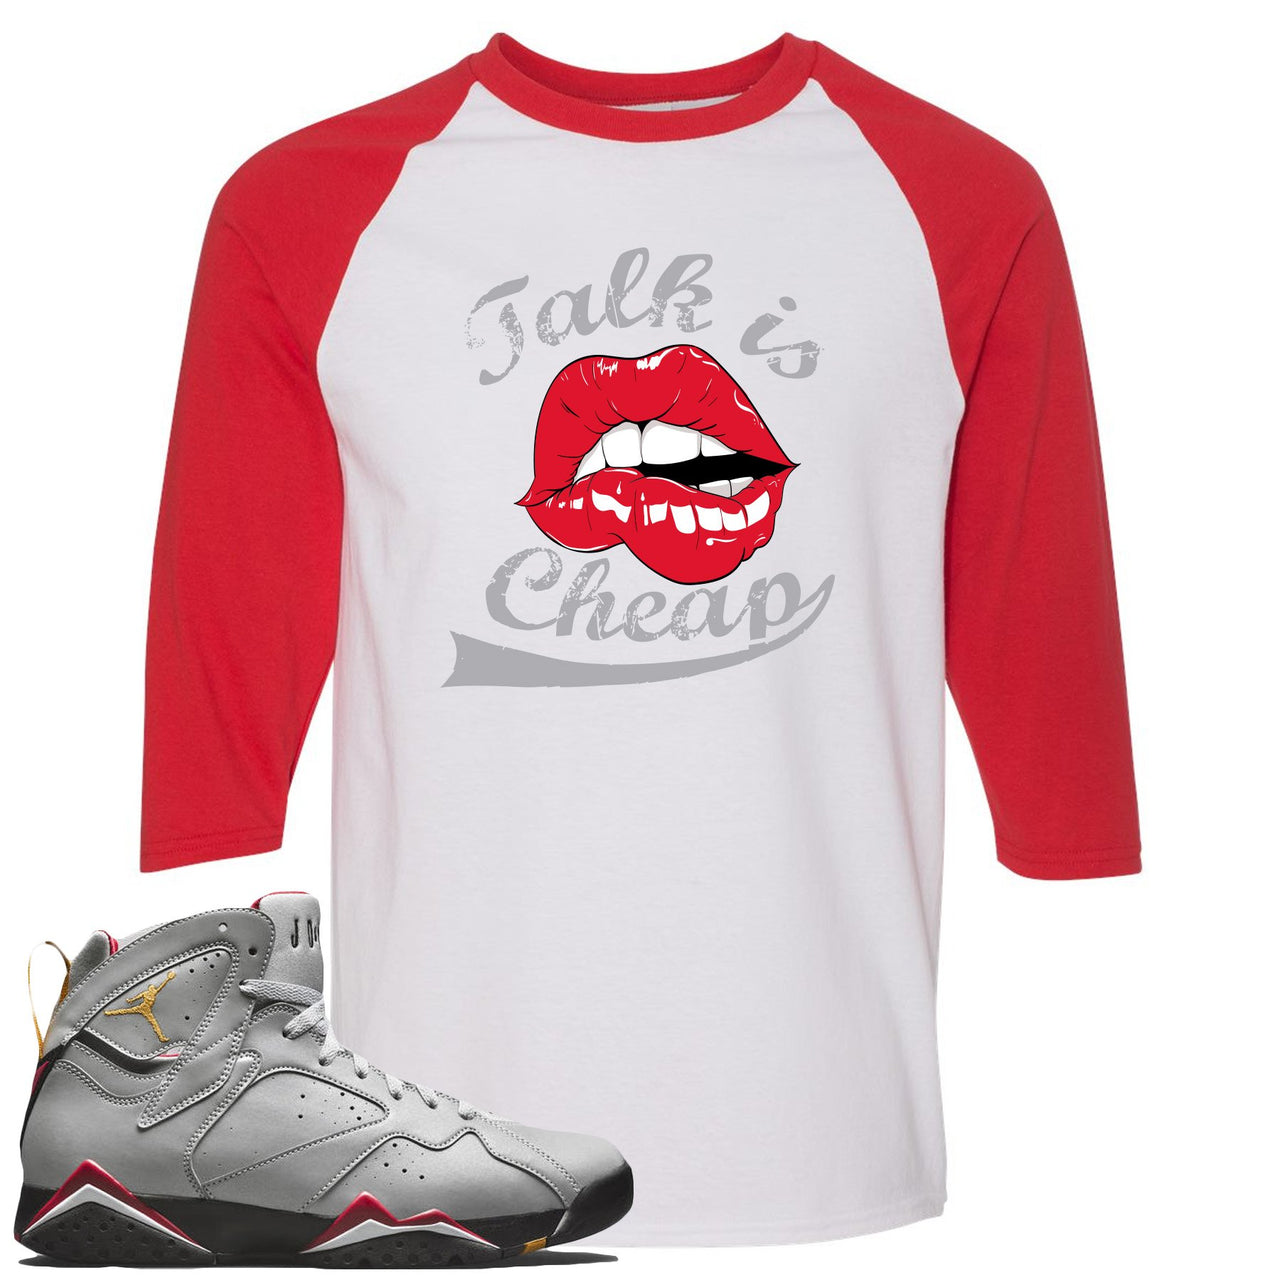 Reflections of a Champion 7s Raglan T Shirt | Talking Lips, White and Red